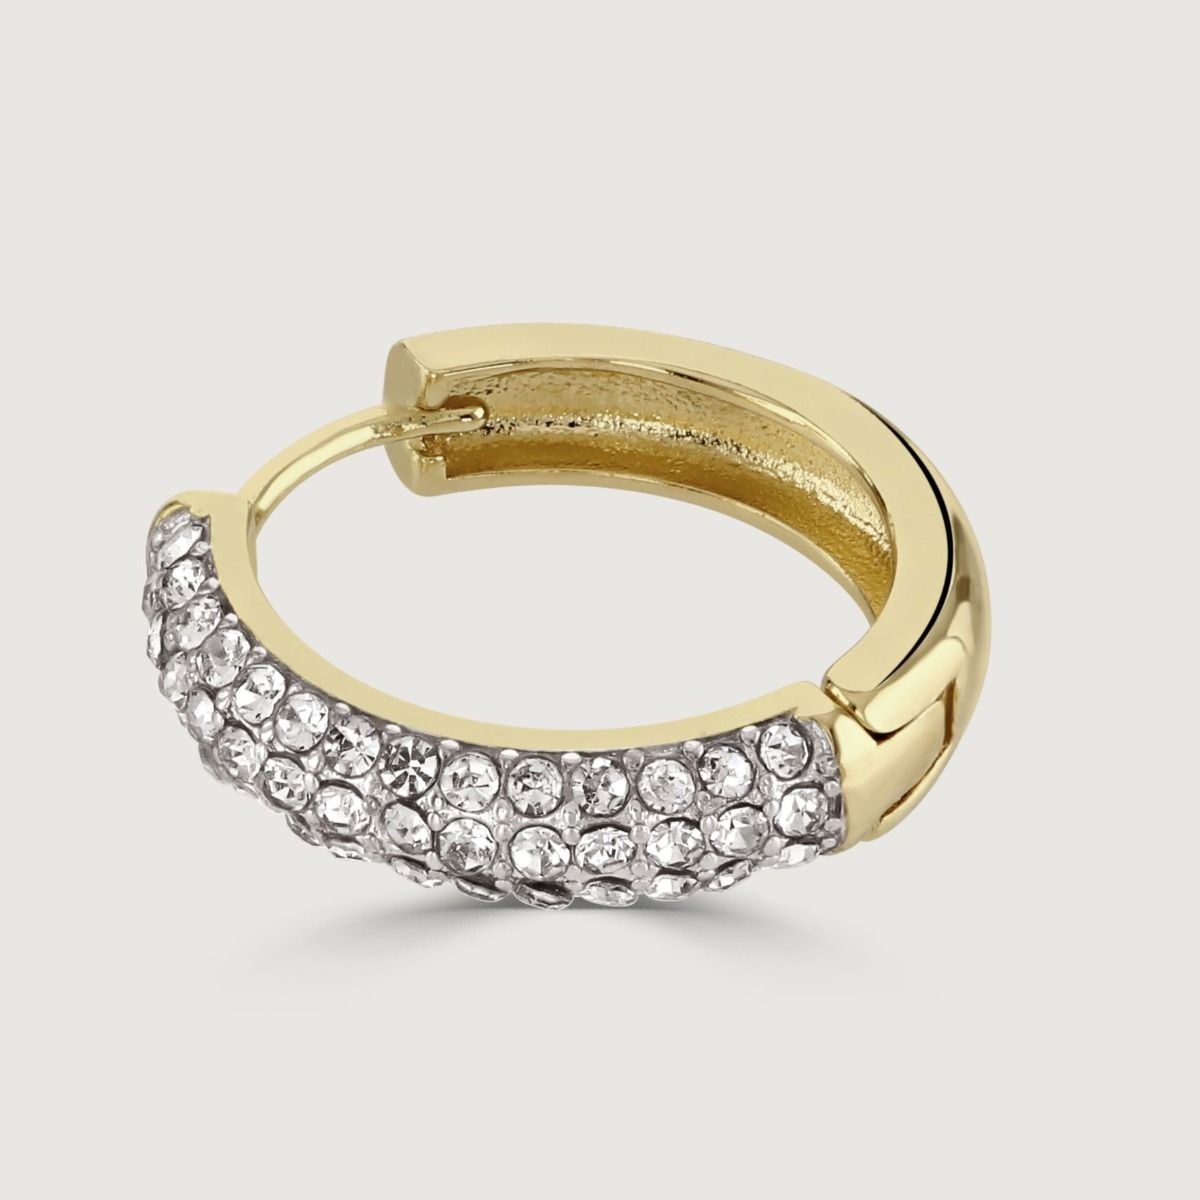 The Two-Tone Pave Huggie Earrings are exquisite pieces that effortlessly combine elegance and glamour. The sparkling pave detailing exudes sophistication, whilst making it an everyday staple.